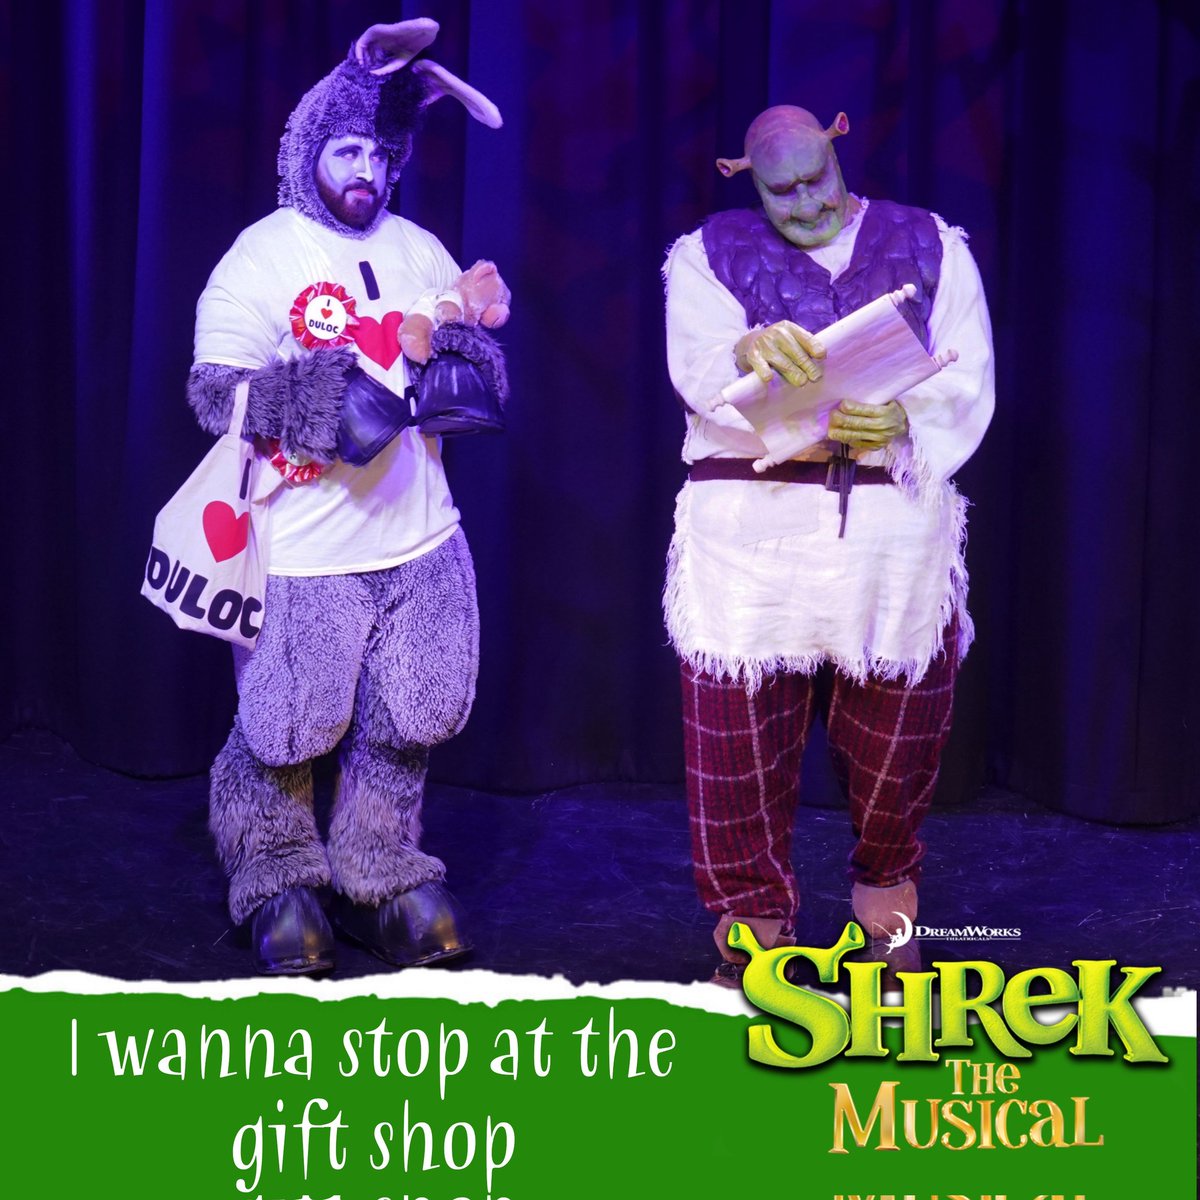 Our FINAL road trip to Duloc is SOLD OUT today. 💚 #IsleofWight #shrek #Musical #october #duloc